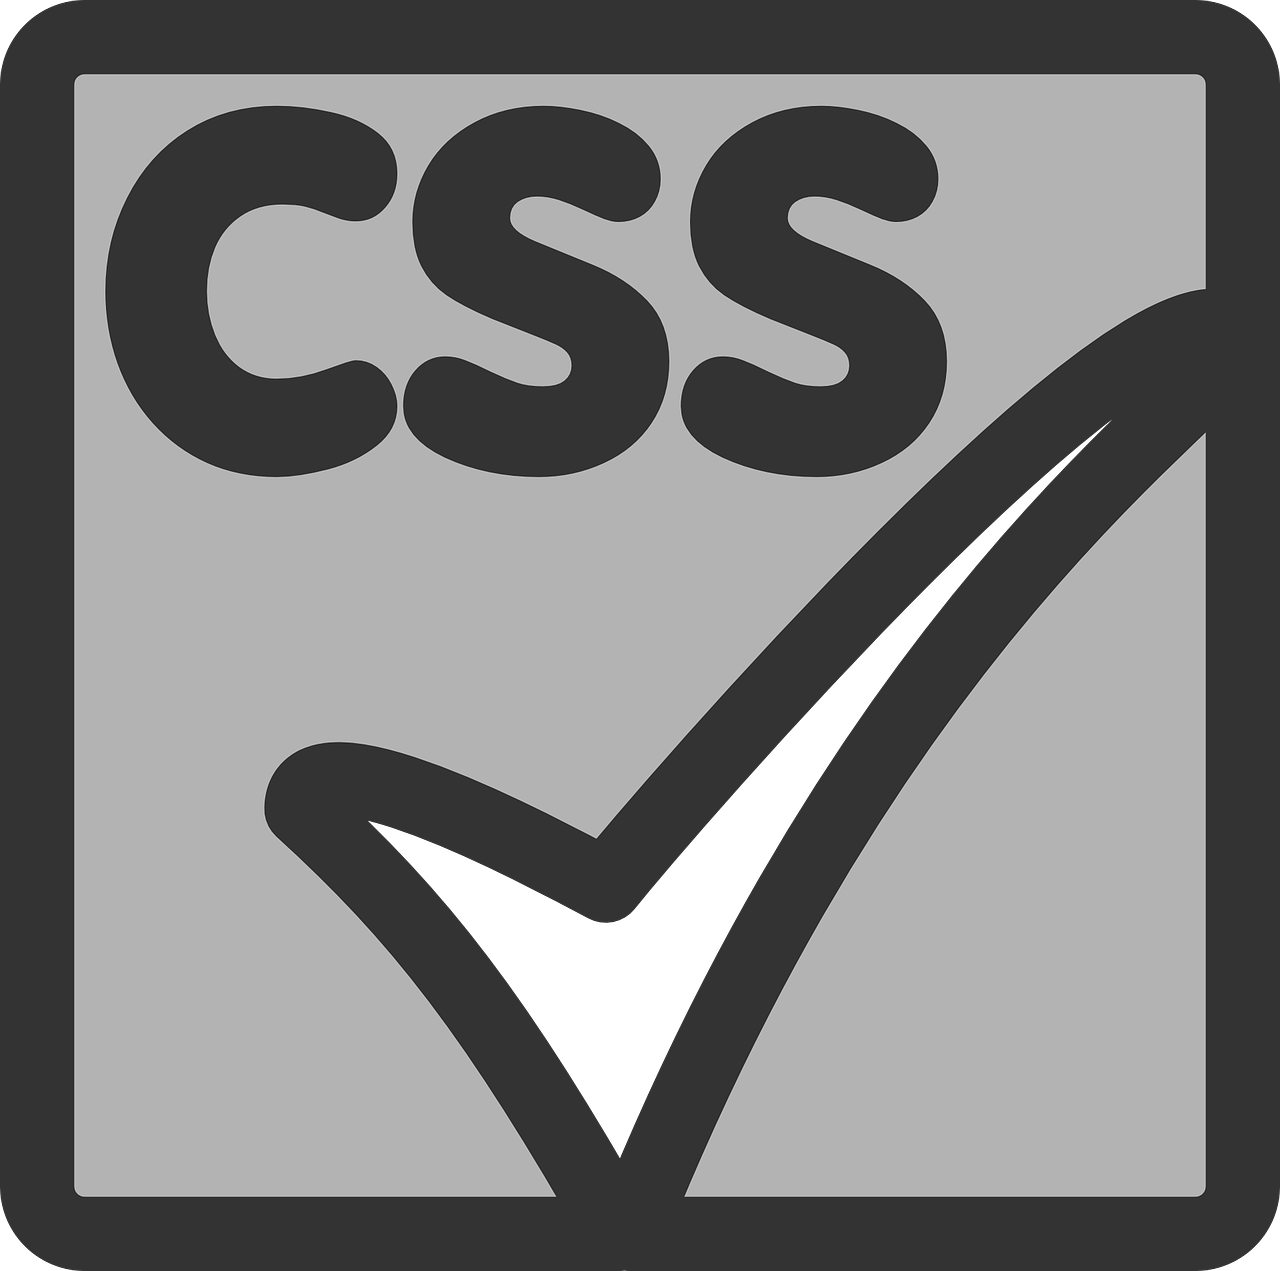 How to Create Better CSS Animations?